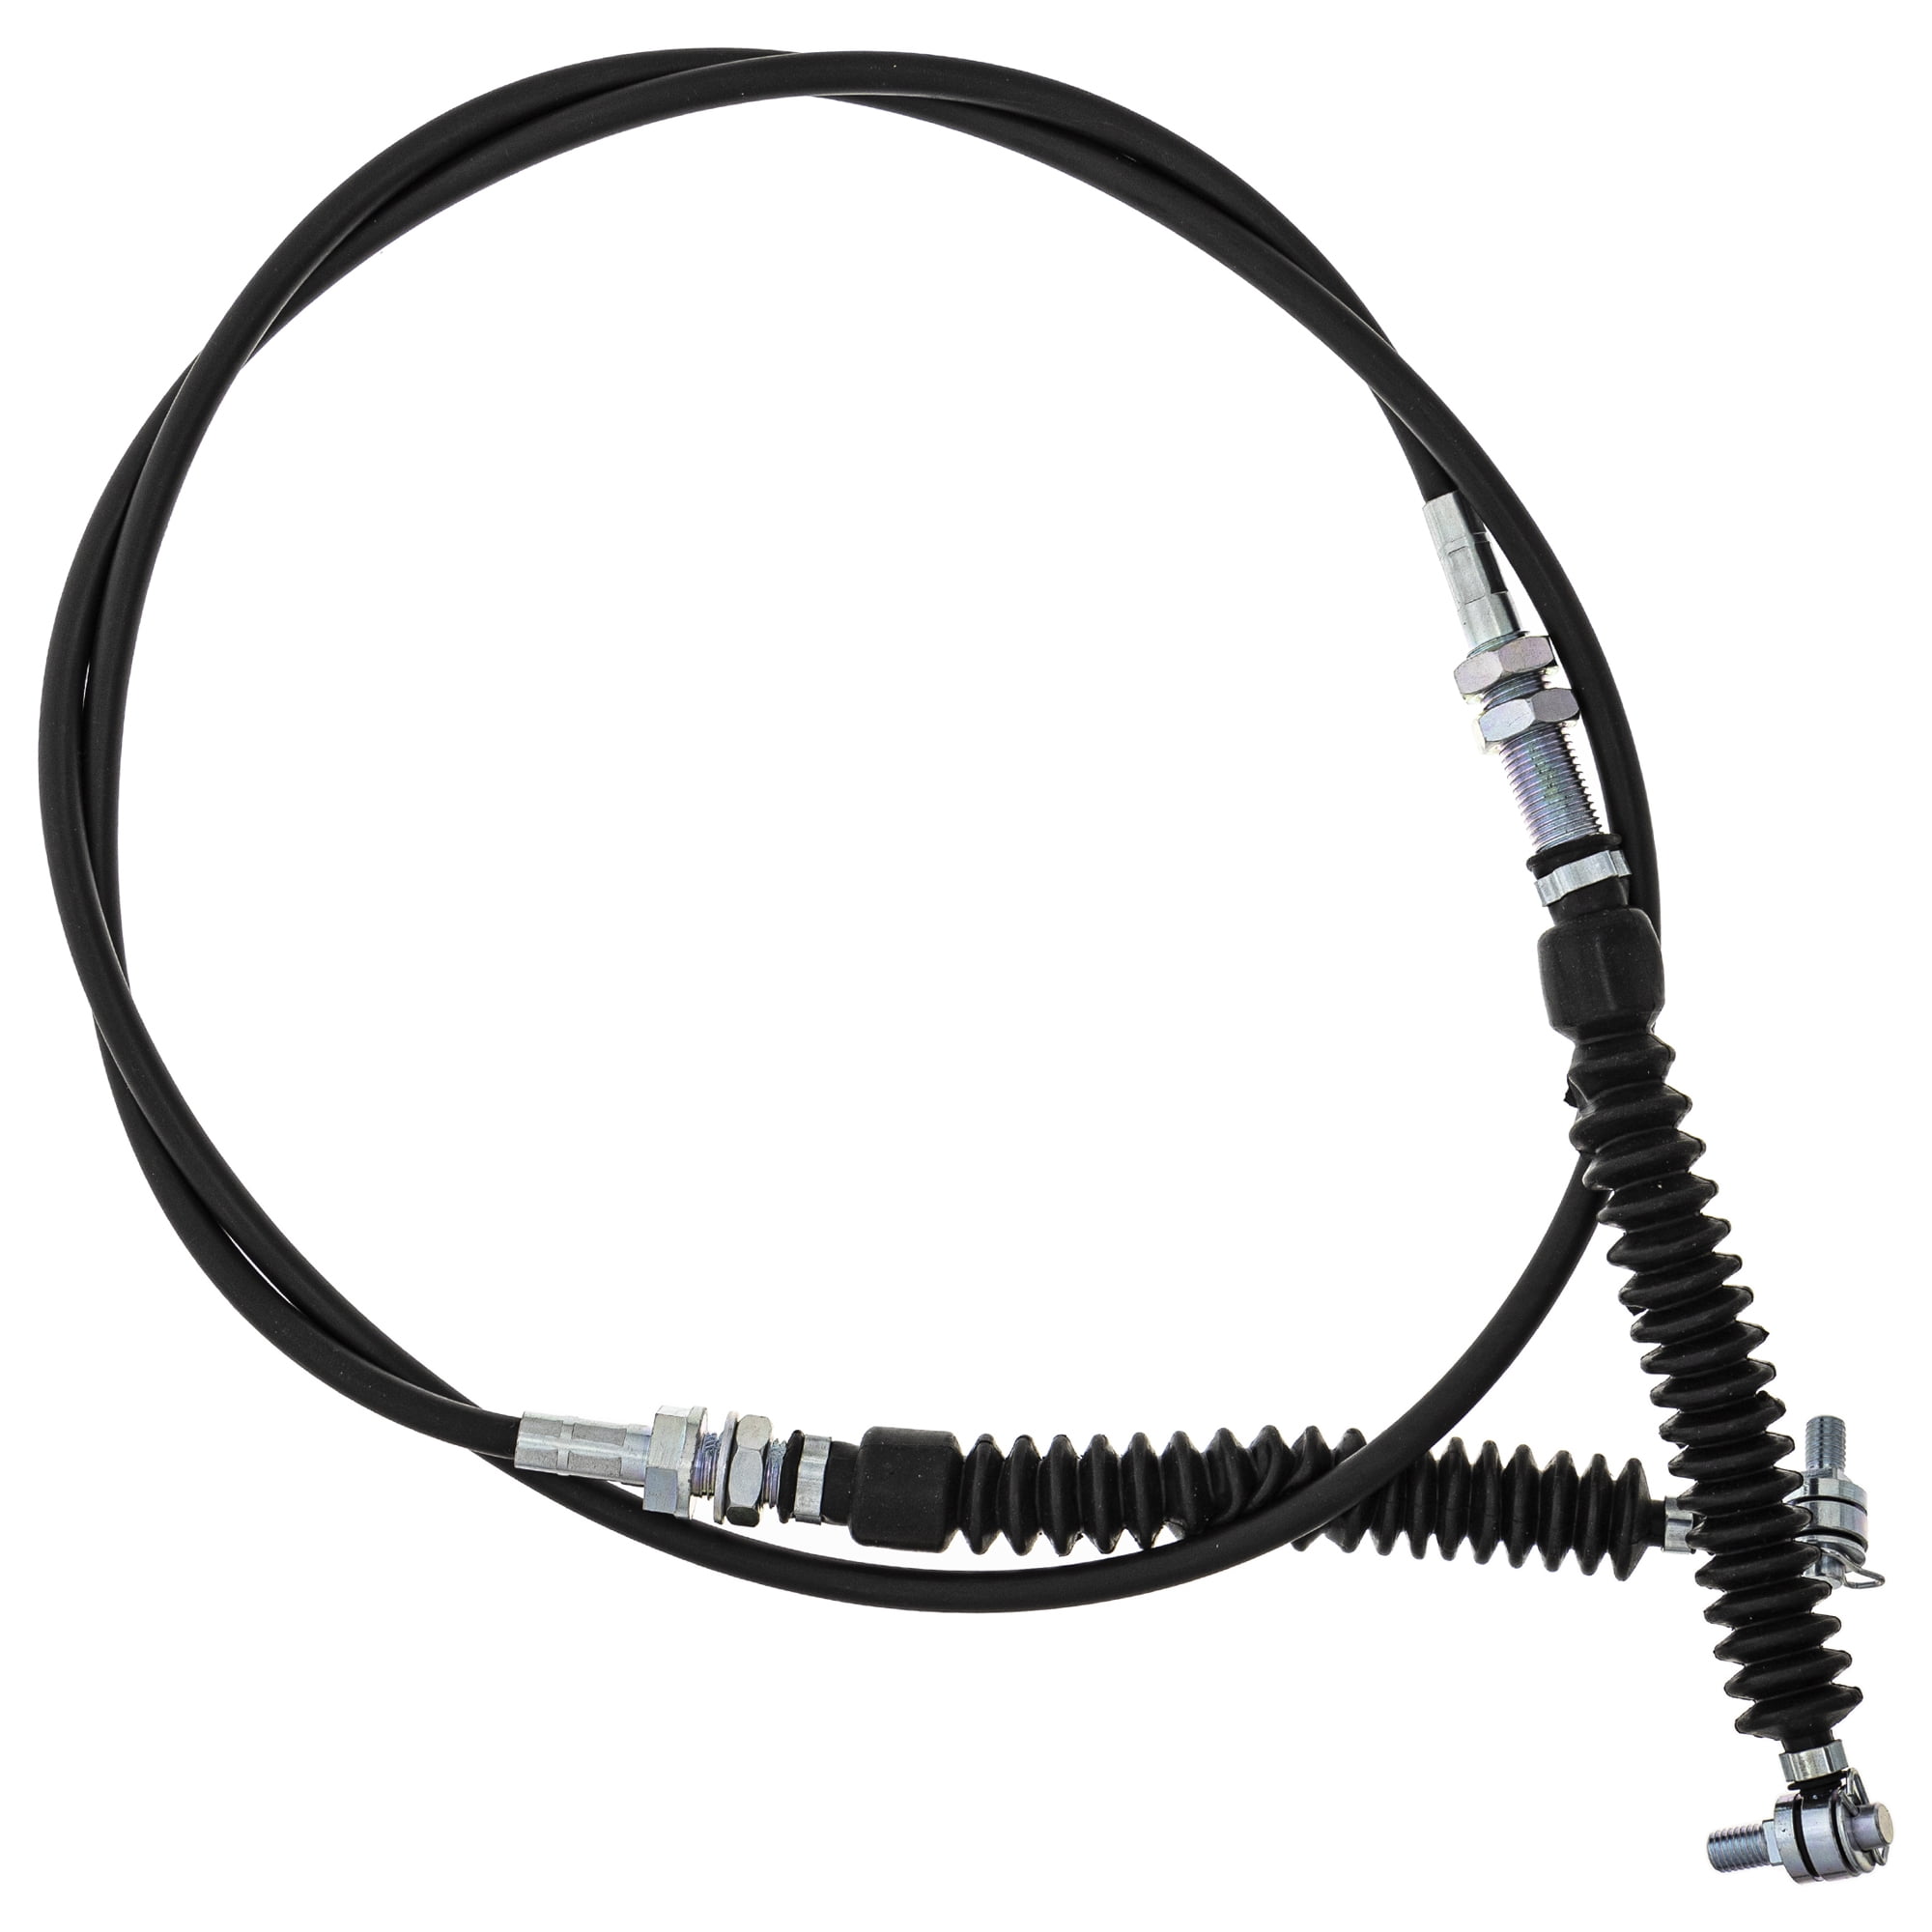 AUTOKAY 141354 Heavy Duty Gear Shift Selector Cable Fits for Select 2005-2010 Polaris Ranger 500 & 700 See Description For Full Fitment; Includes XP EFI; Replaces 7081209 